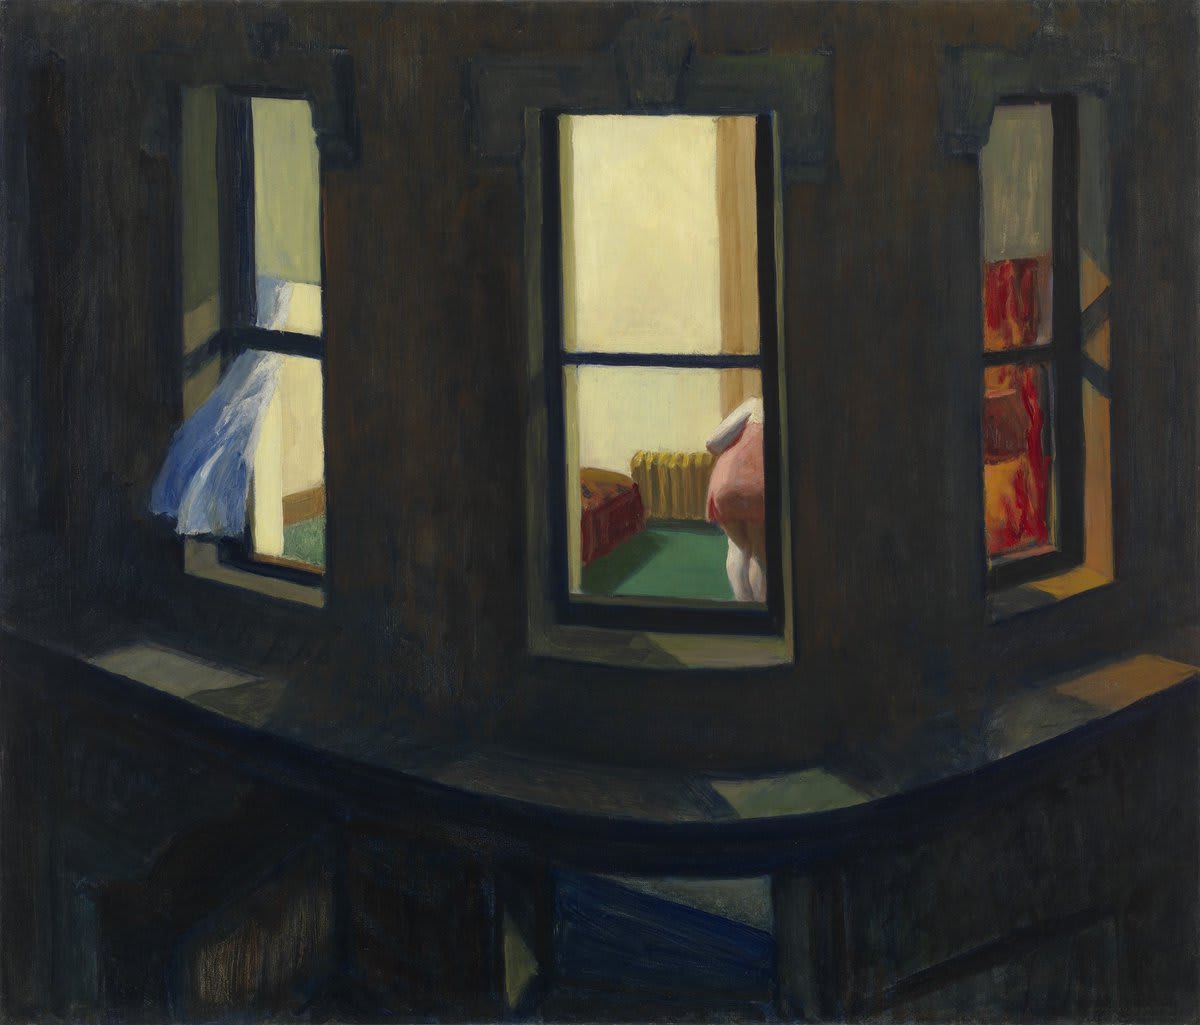 Edward Hopper’s “Night Windows” exposes the voyeuristic opportunities of the modern American city—and the contradiction it offers between access to the intimate lives of strangers and urban loneliness and isolation.